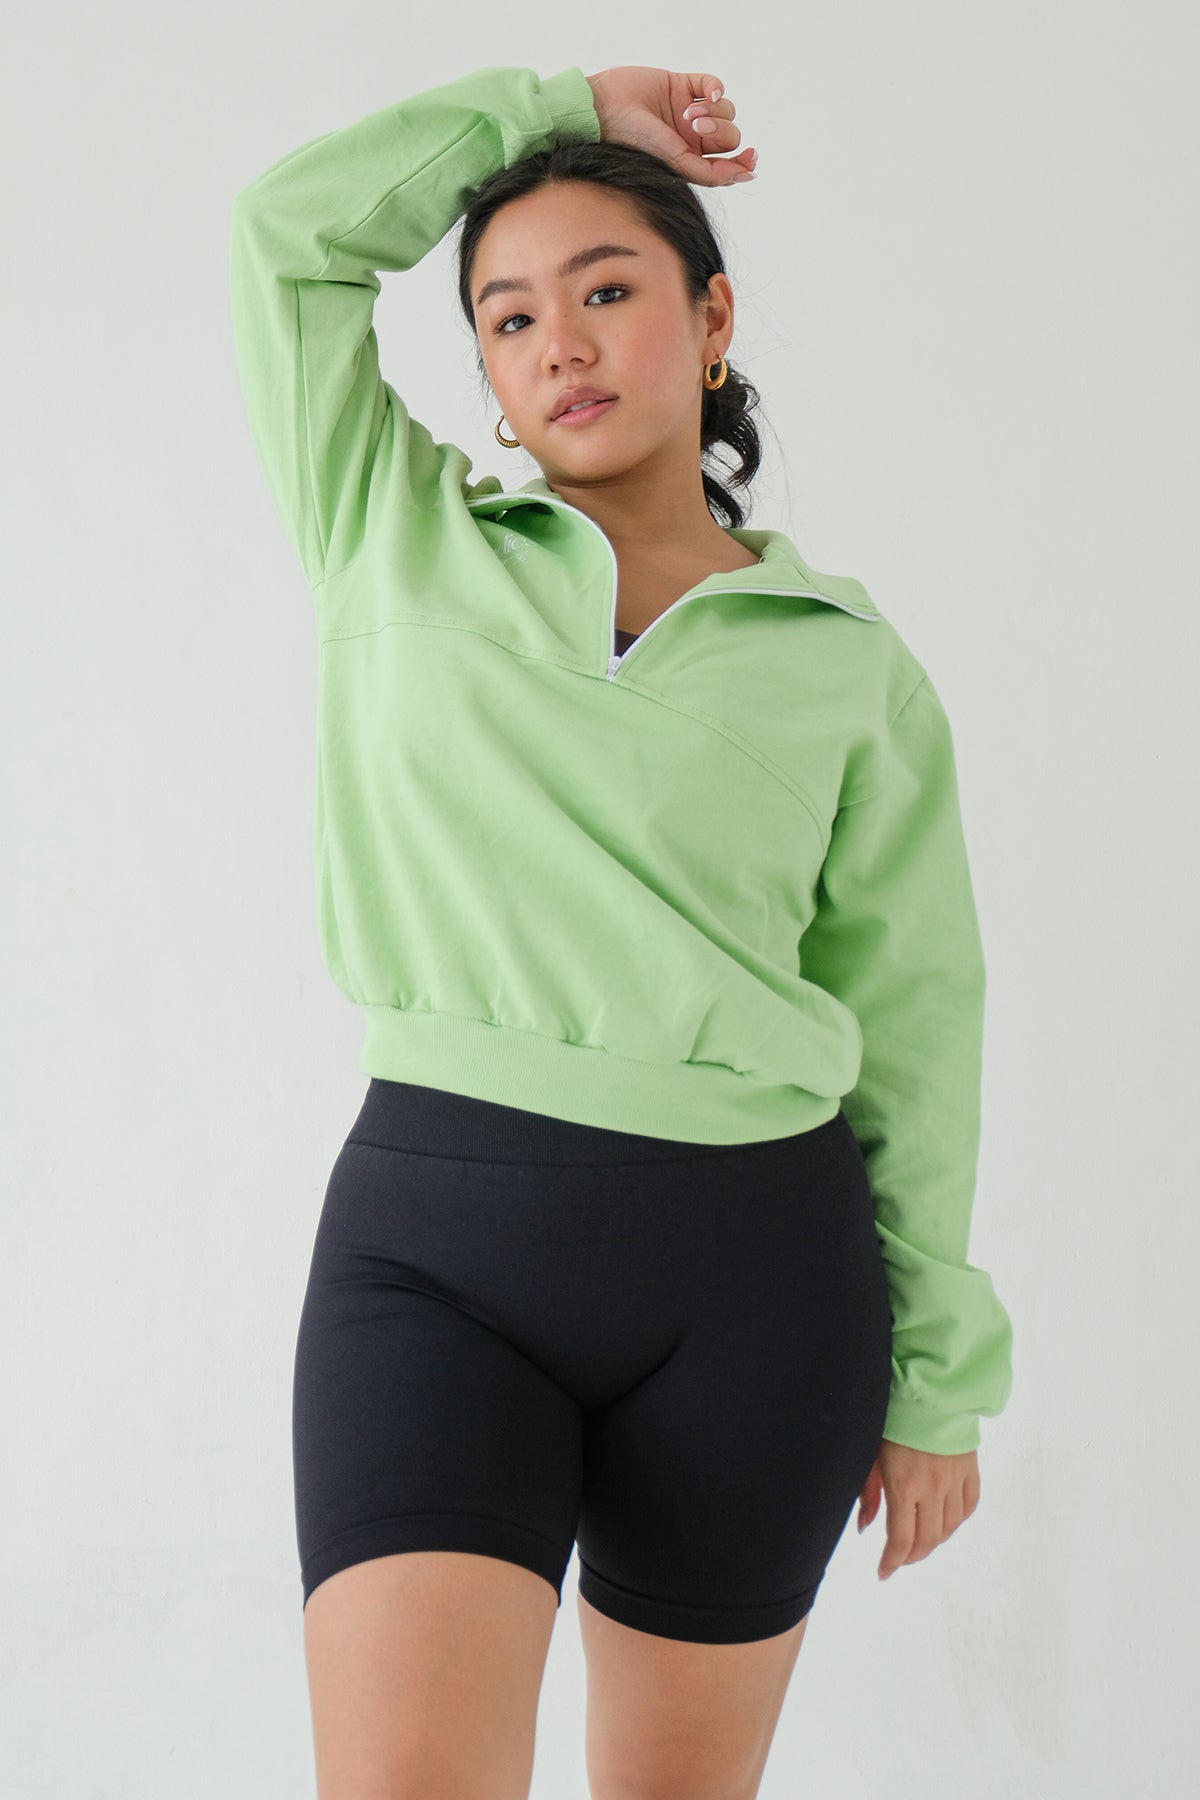 All Bodies Matter Sweater In Lime (4 LEFT)